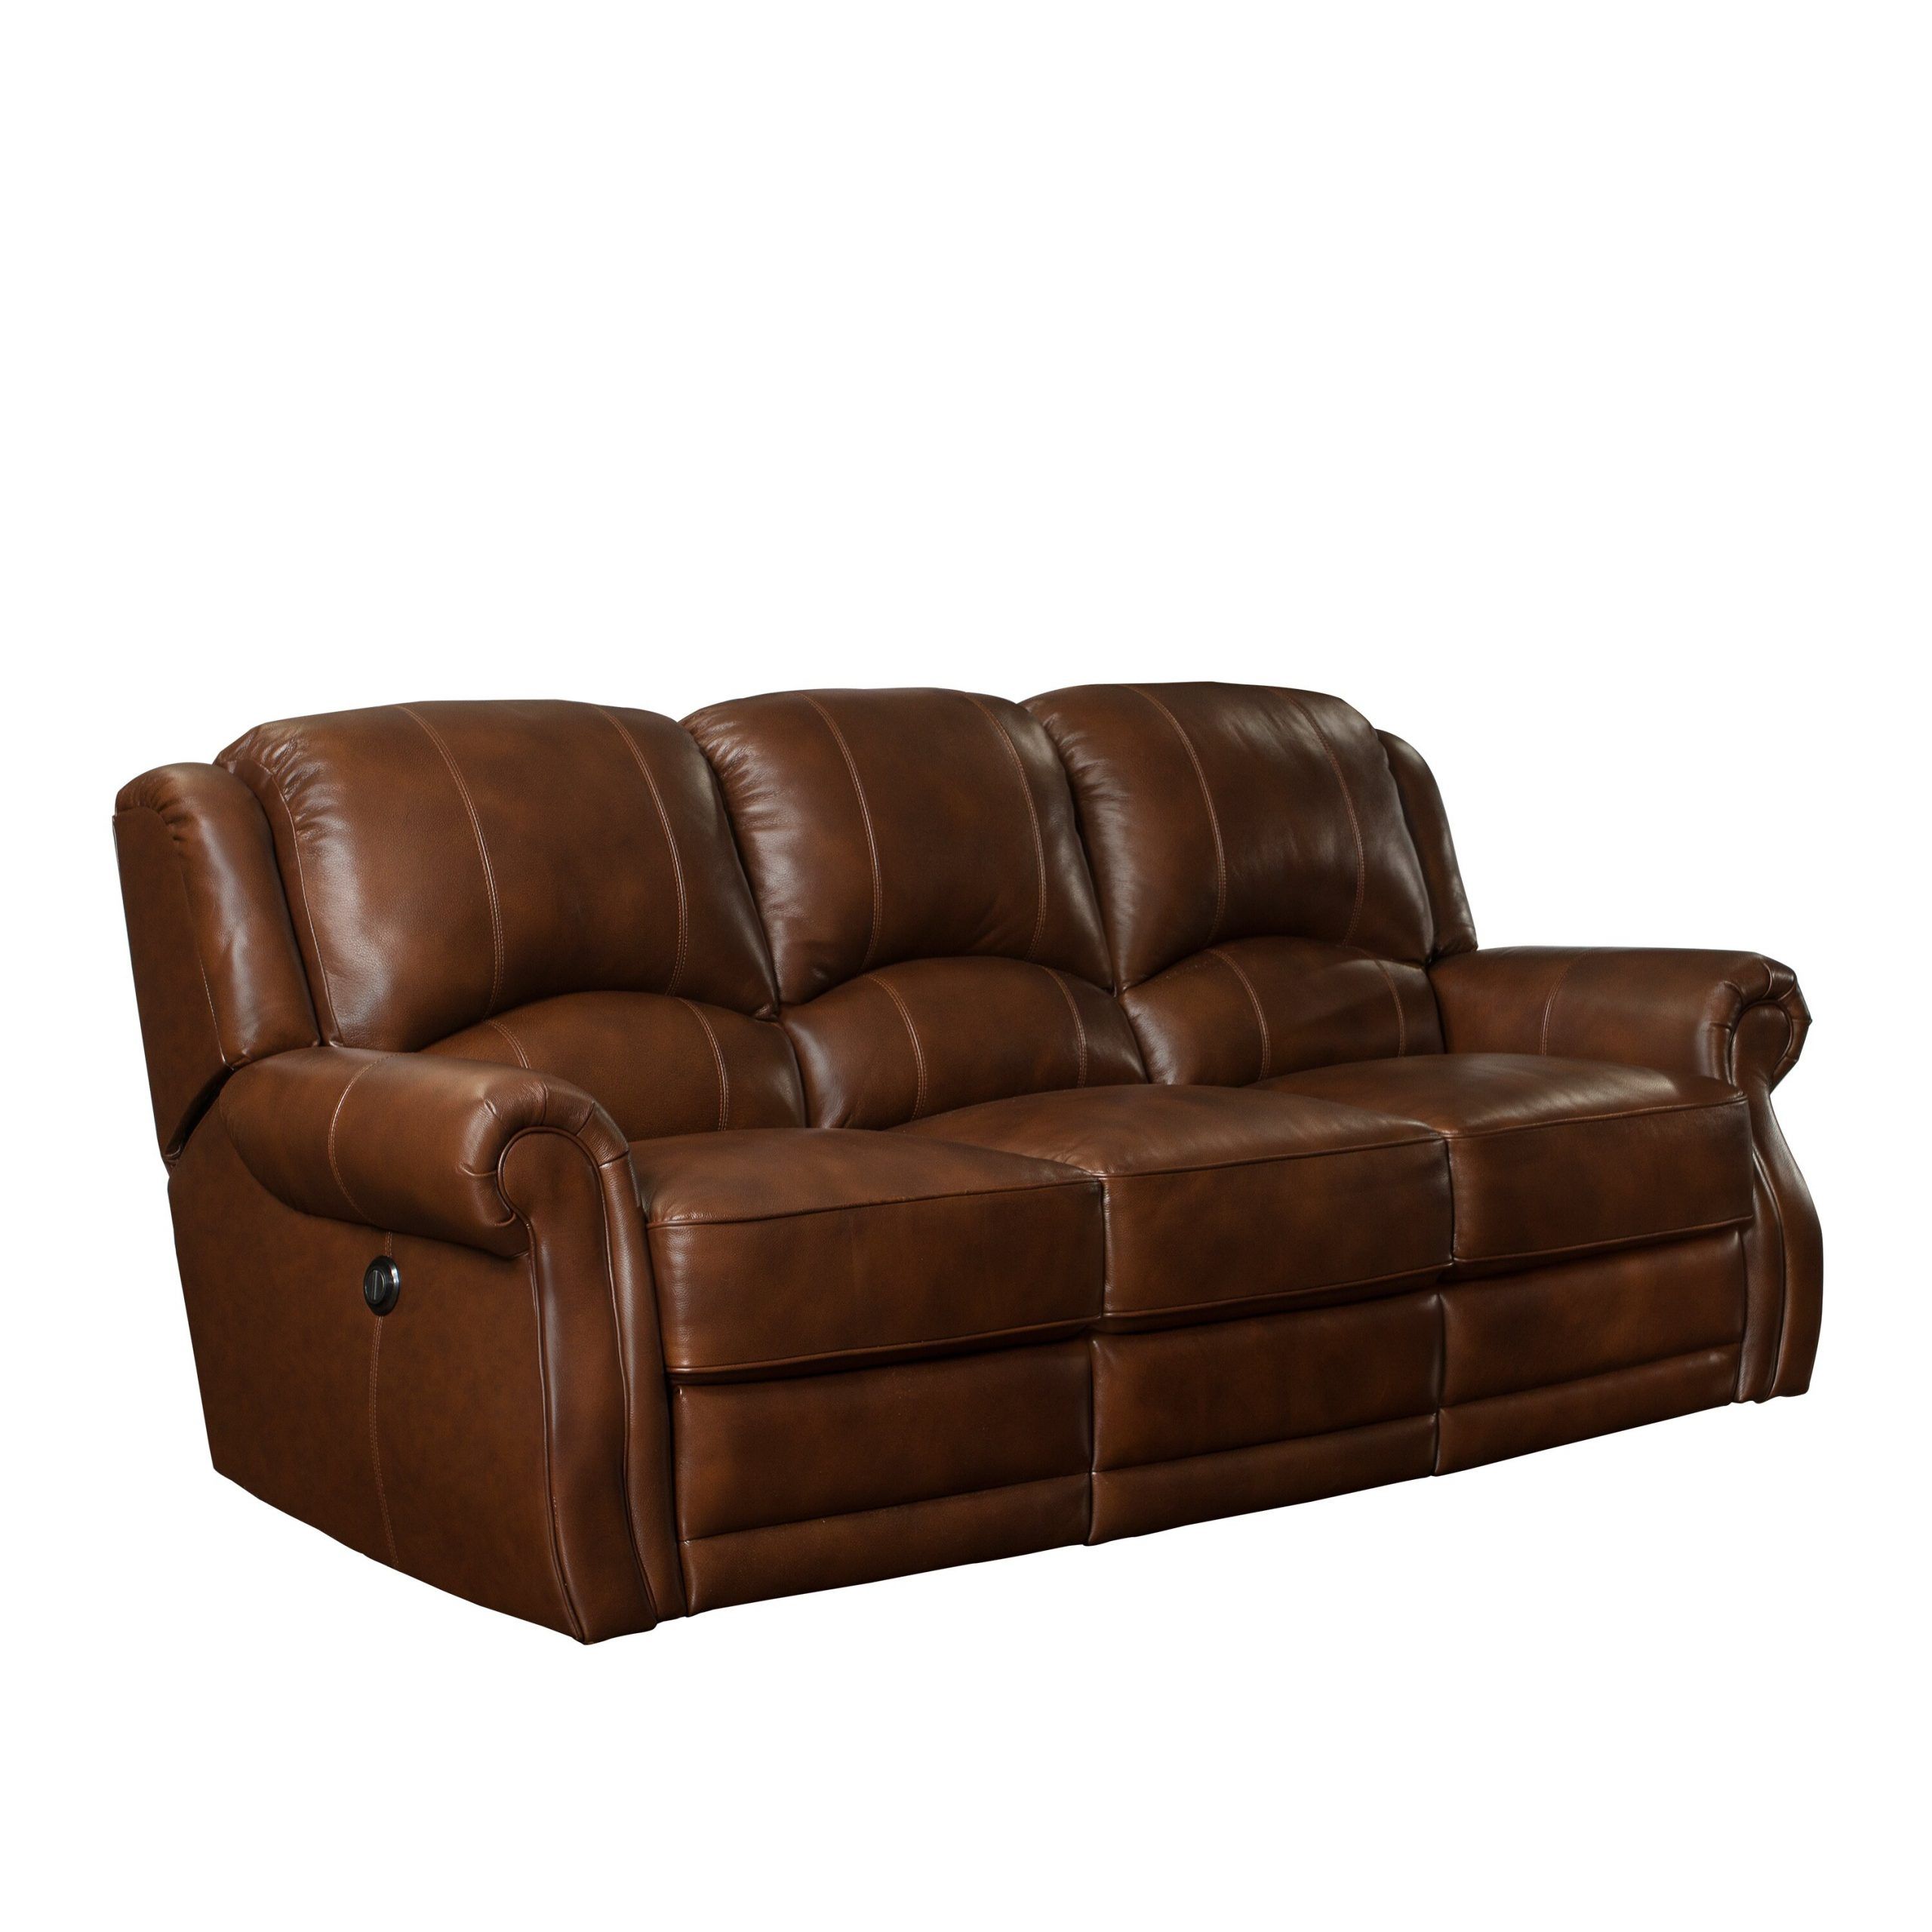 Barcalounger Cedar Hill Casual Comforts Power Leather With Regard To Charleston Power Reclining Sofas (View 12 of 15)